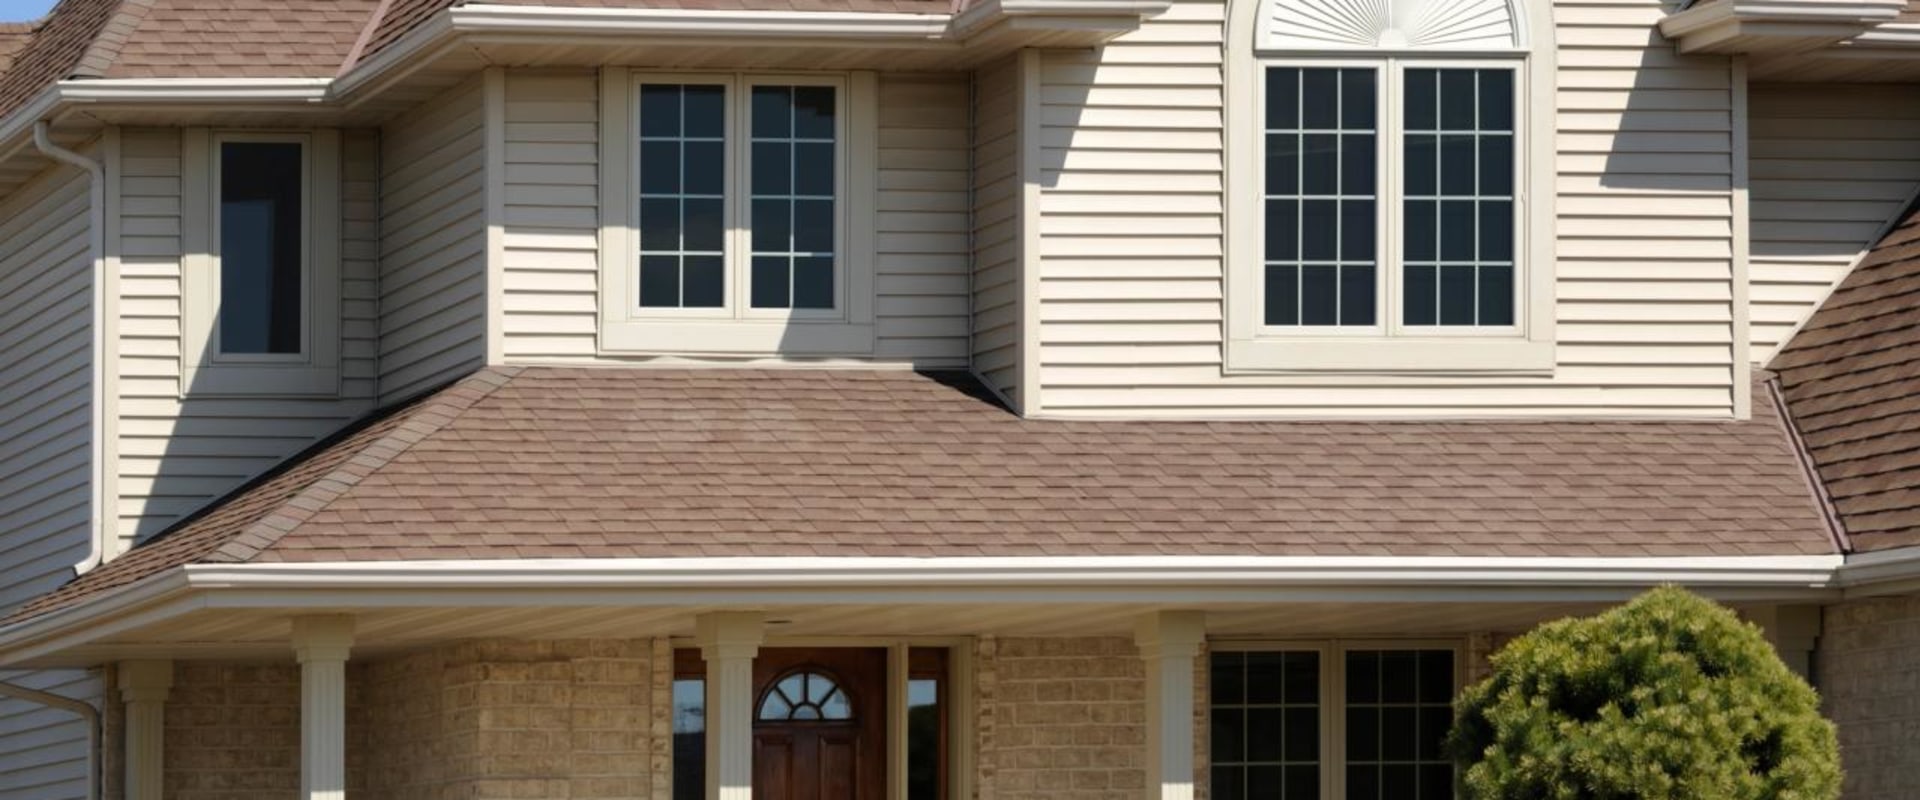 What is the best type of roof covering?